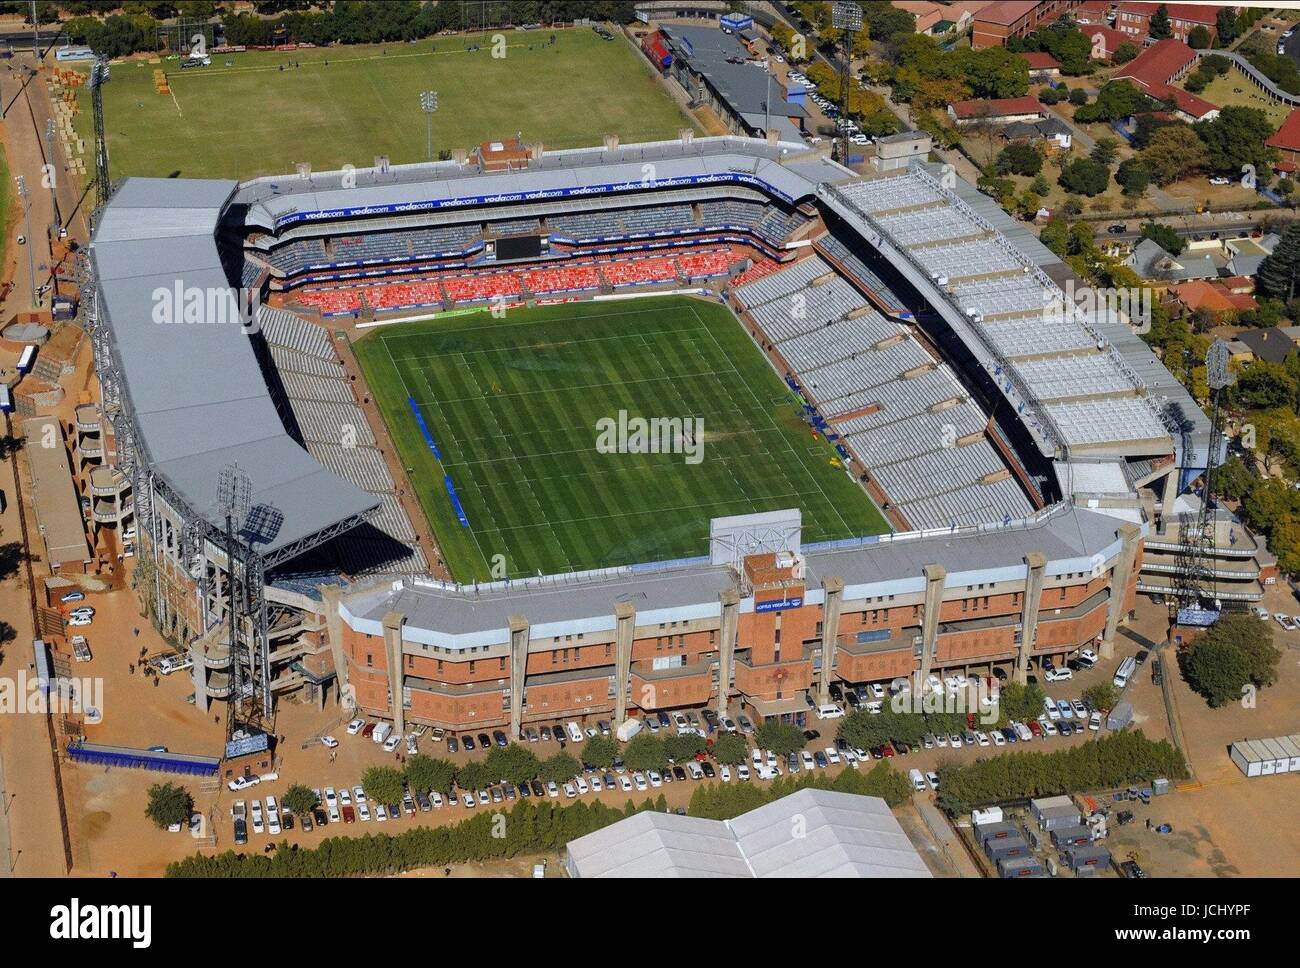 LOFTUS VERSFELD STADIUM PRETORIA, SOUTH AFRICA (UK USE ONLY) 2010 WORLD CUP STADIUMS (UK USE ONLY) PRETORIA, SOUTH AFRICA 03 December 2009 GAB5537     WARNING! This Photograph May Only Be Used For Newspaper And/Or Magazine Editorial Purposes. May Not Be Used For Publications Involving 1 player, 1 Club Or 1 Competition  Without Written Authorisation From Football DataCo Ltd. For Any Queries, Please Contact Football DataCo Ltd on +44 (0) 207 864 9121 Stock Photo